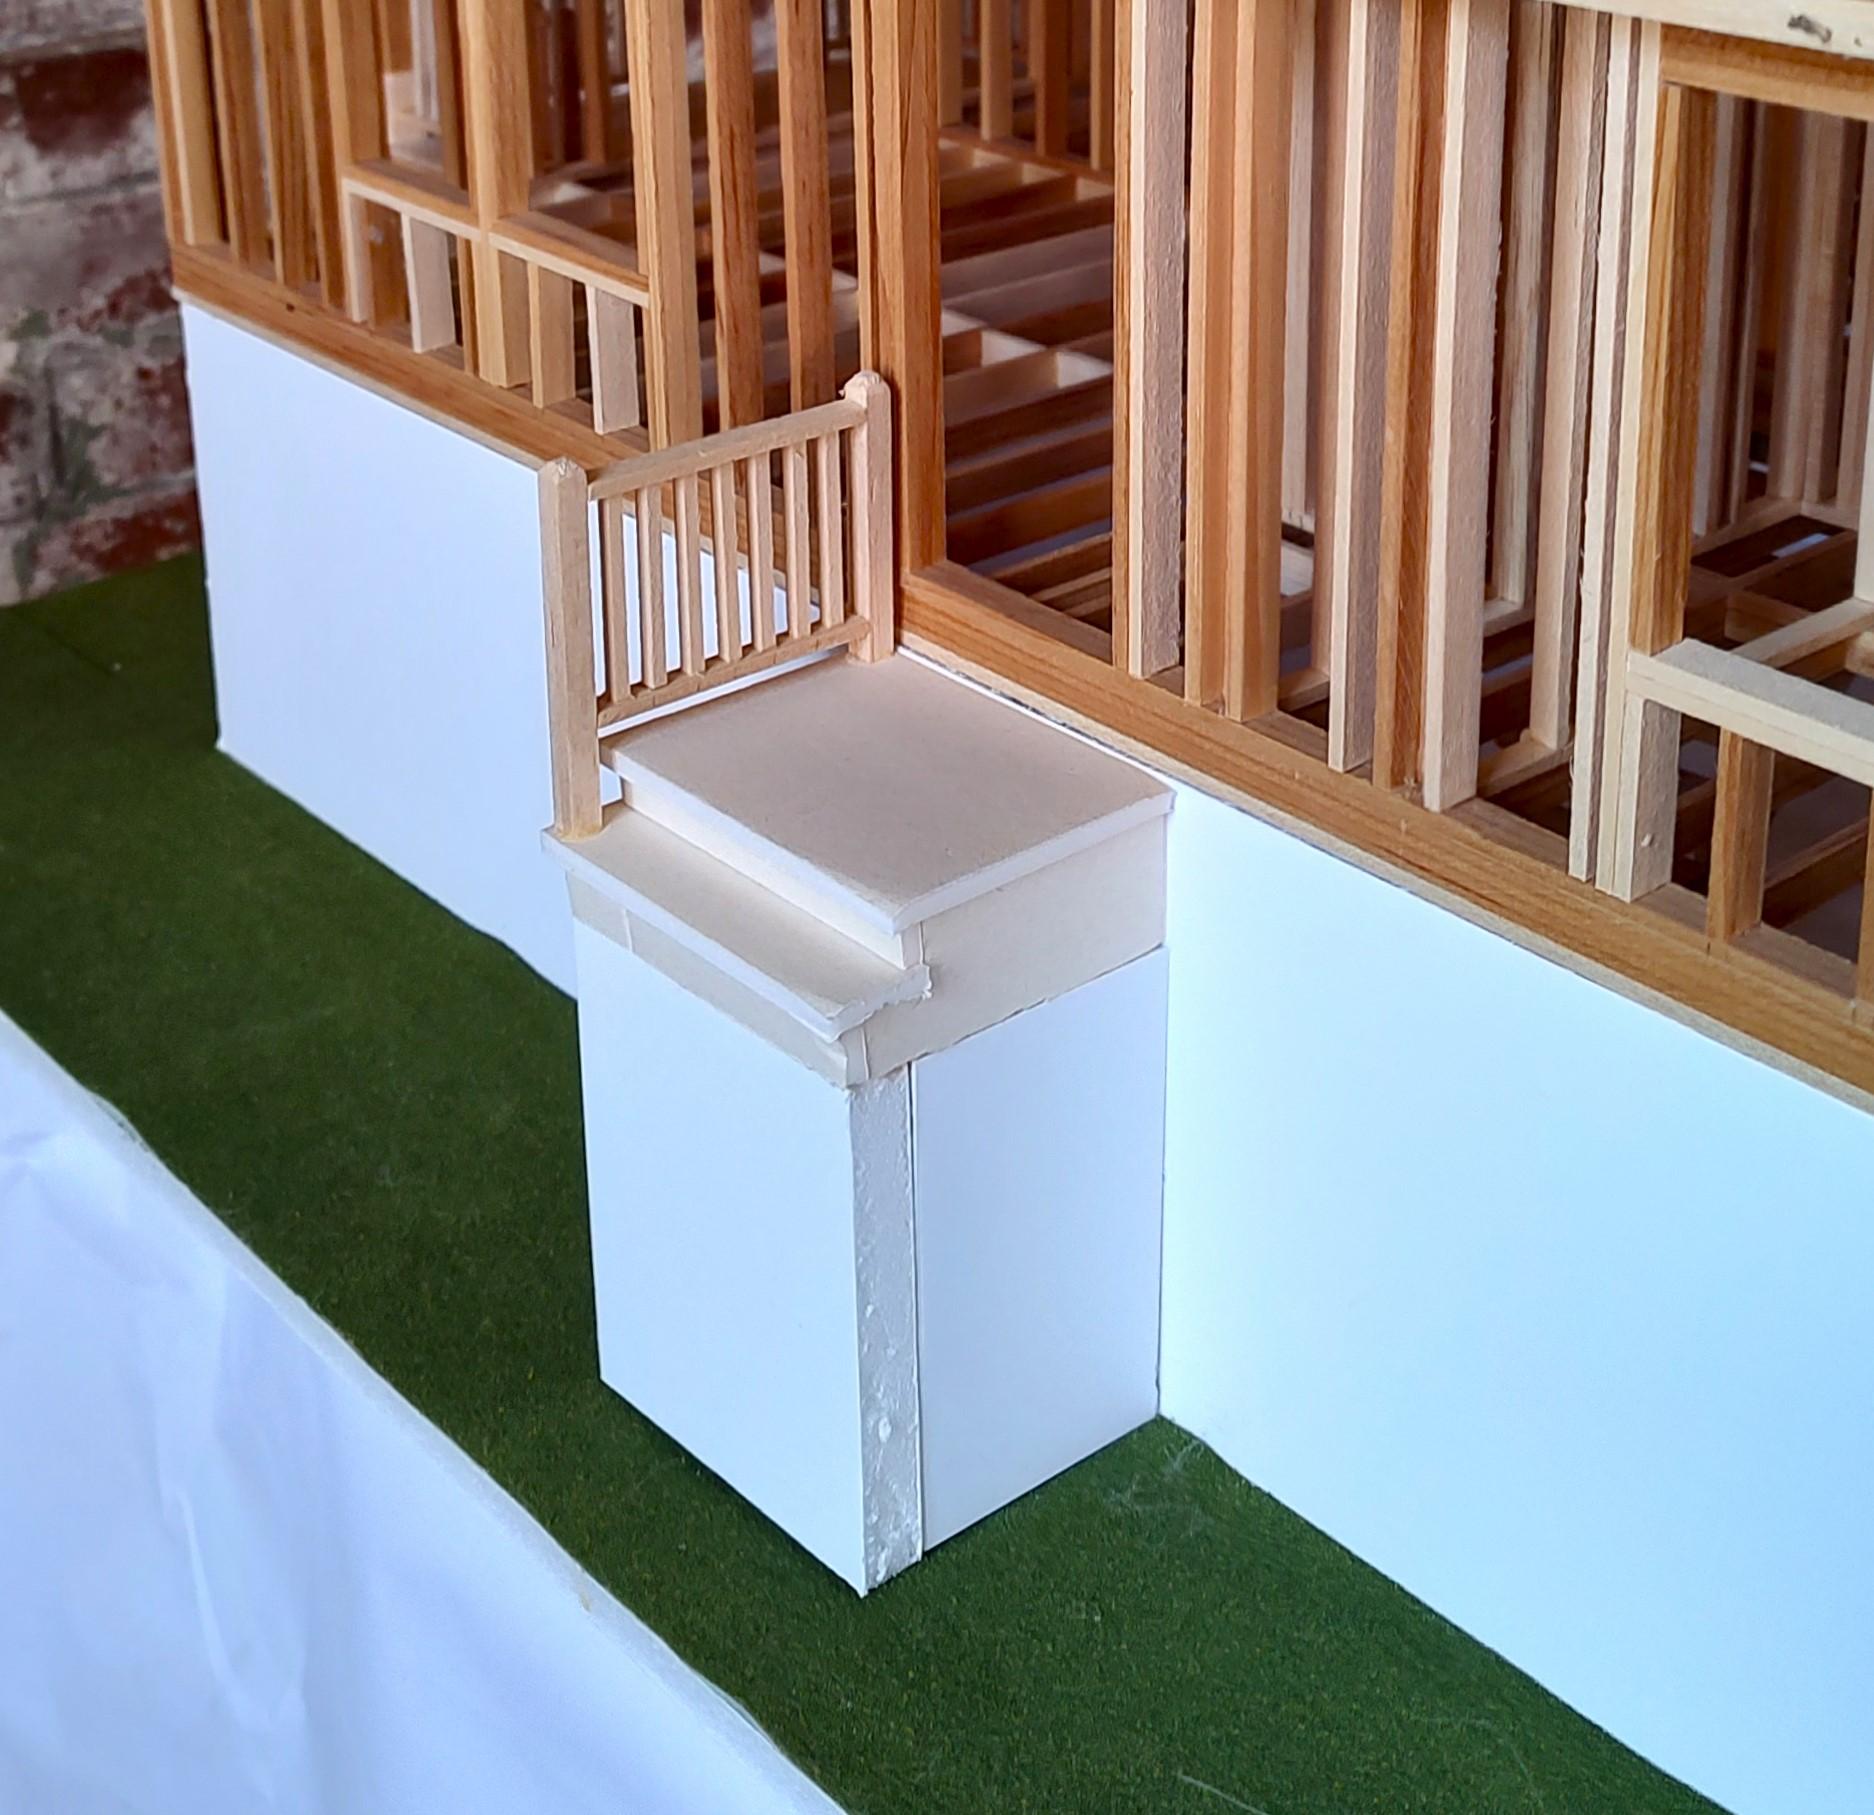 Architectural Model of Timber Framed House 2